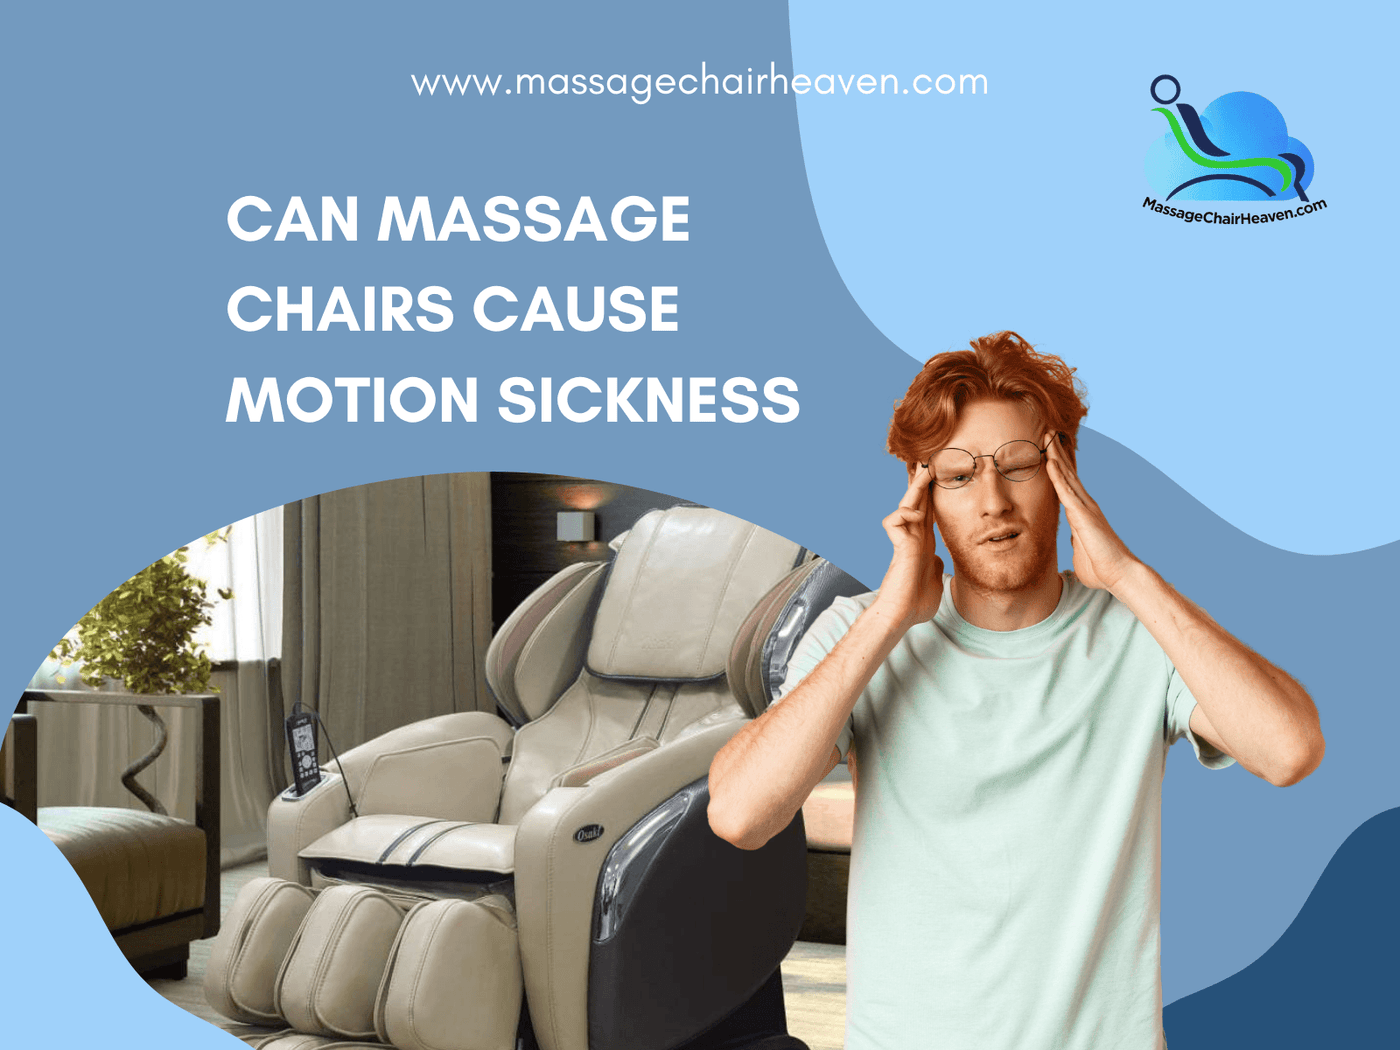 Can Massage Chairs Cause Motion Sickness?